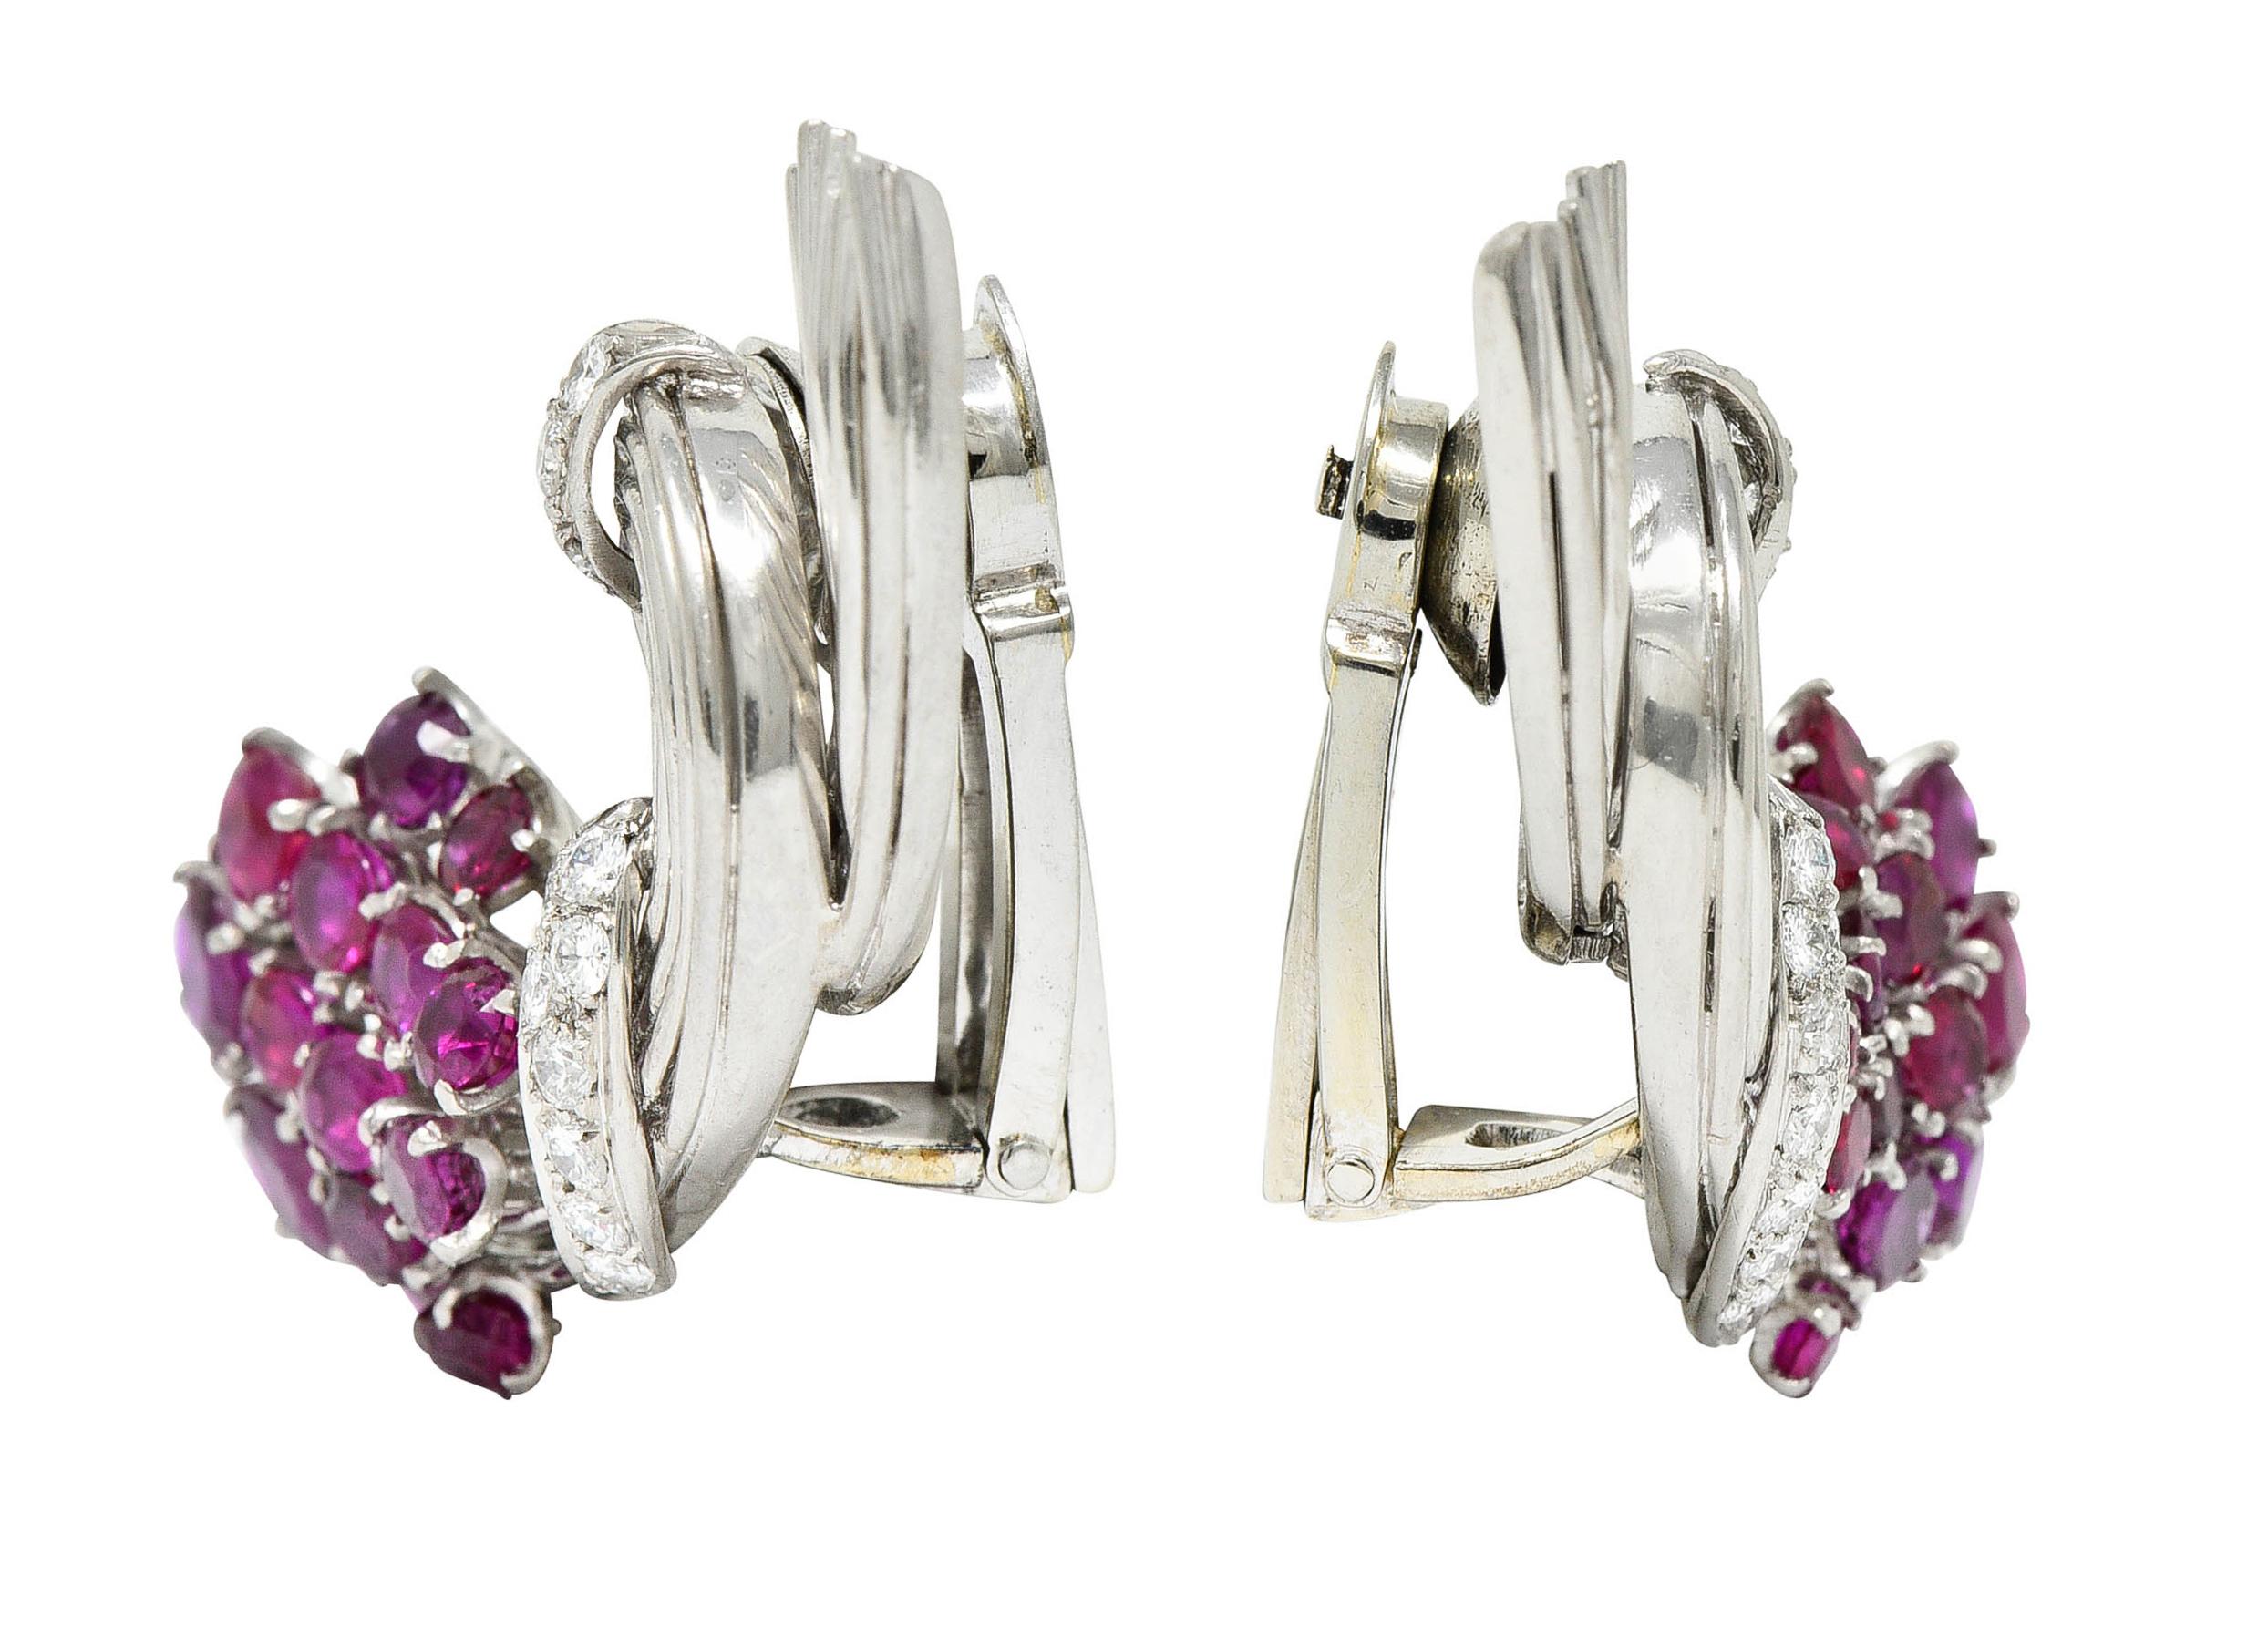 Ear-clip earrings are designed as spiraled bouquets

Featuring clustered round cut rubies weighing in total approximately 4.00 carats

Transparent to translucent and strongly purplish red in color

Accented by round brilliant cut diamonds weighing